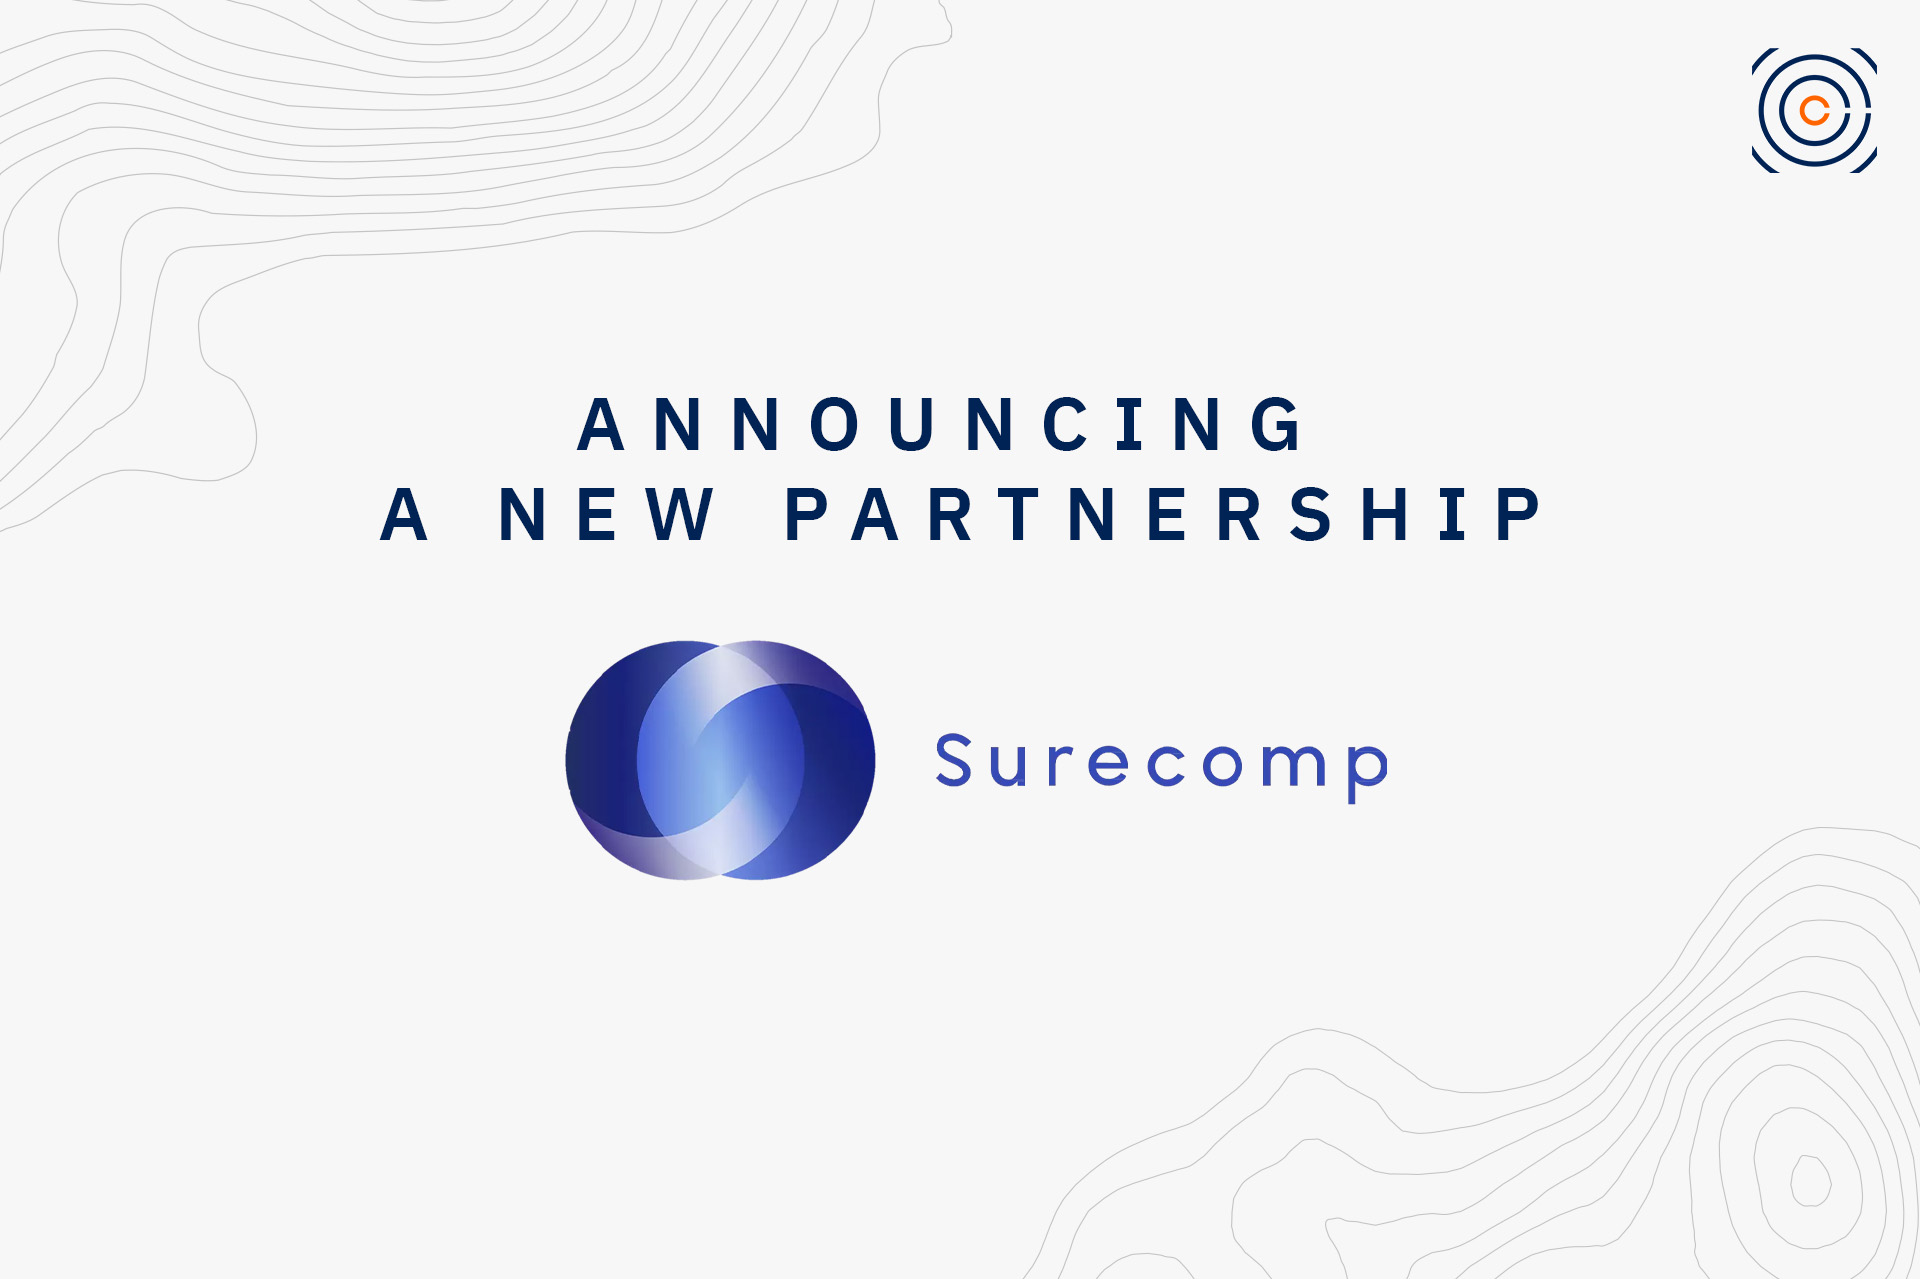 Contour and Surecomp enter strategic partnership to accelerate interoperability between digital trade finance solutions